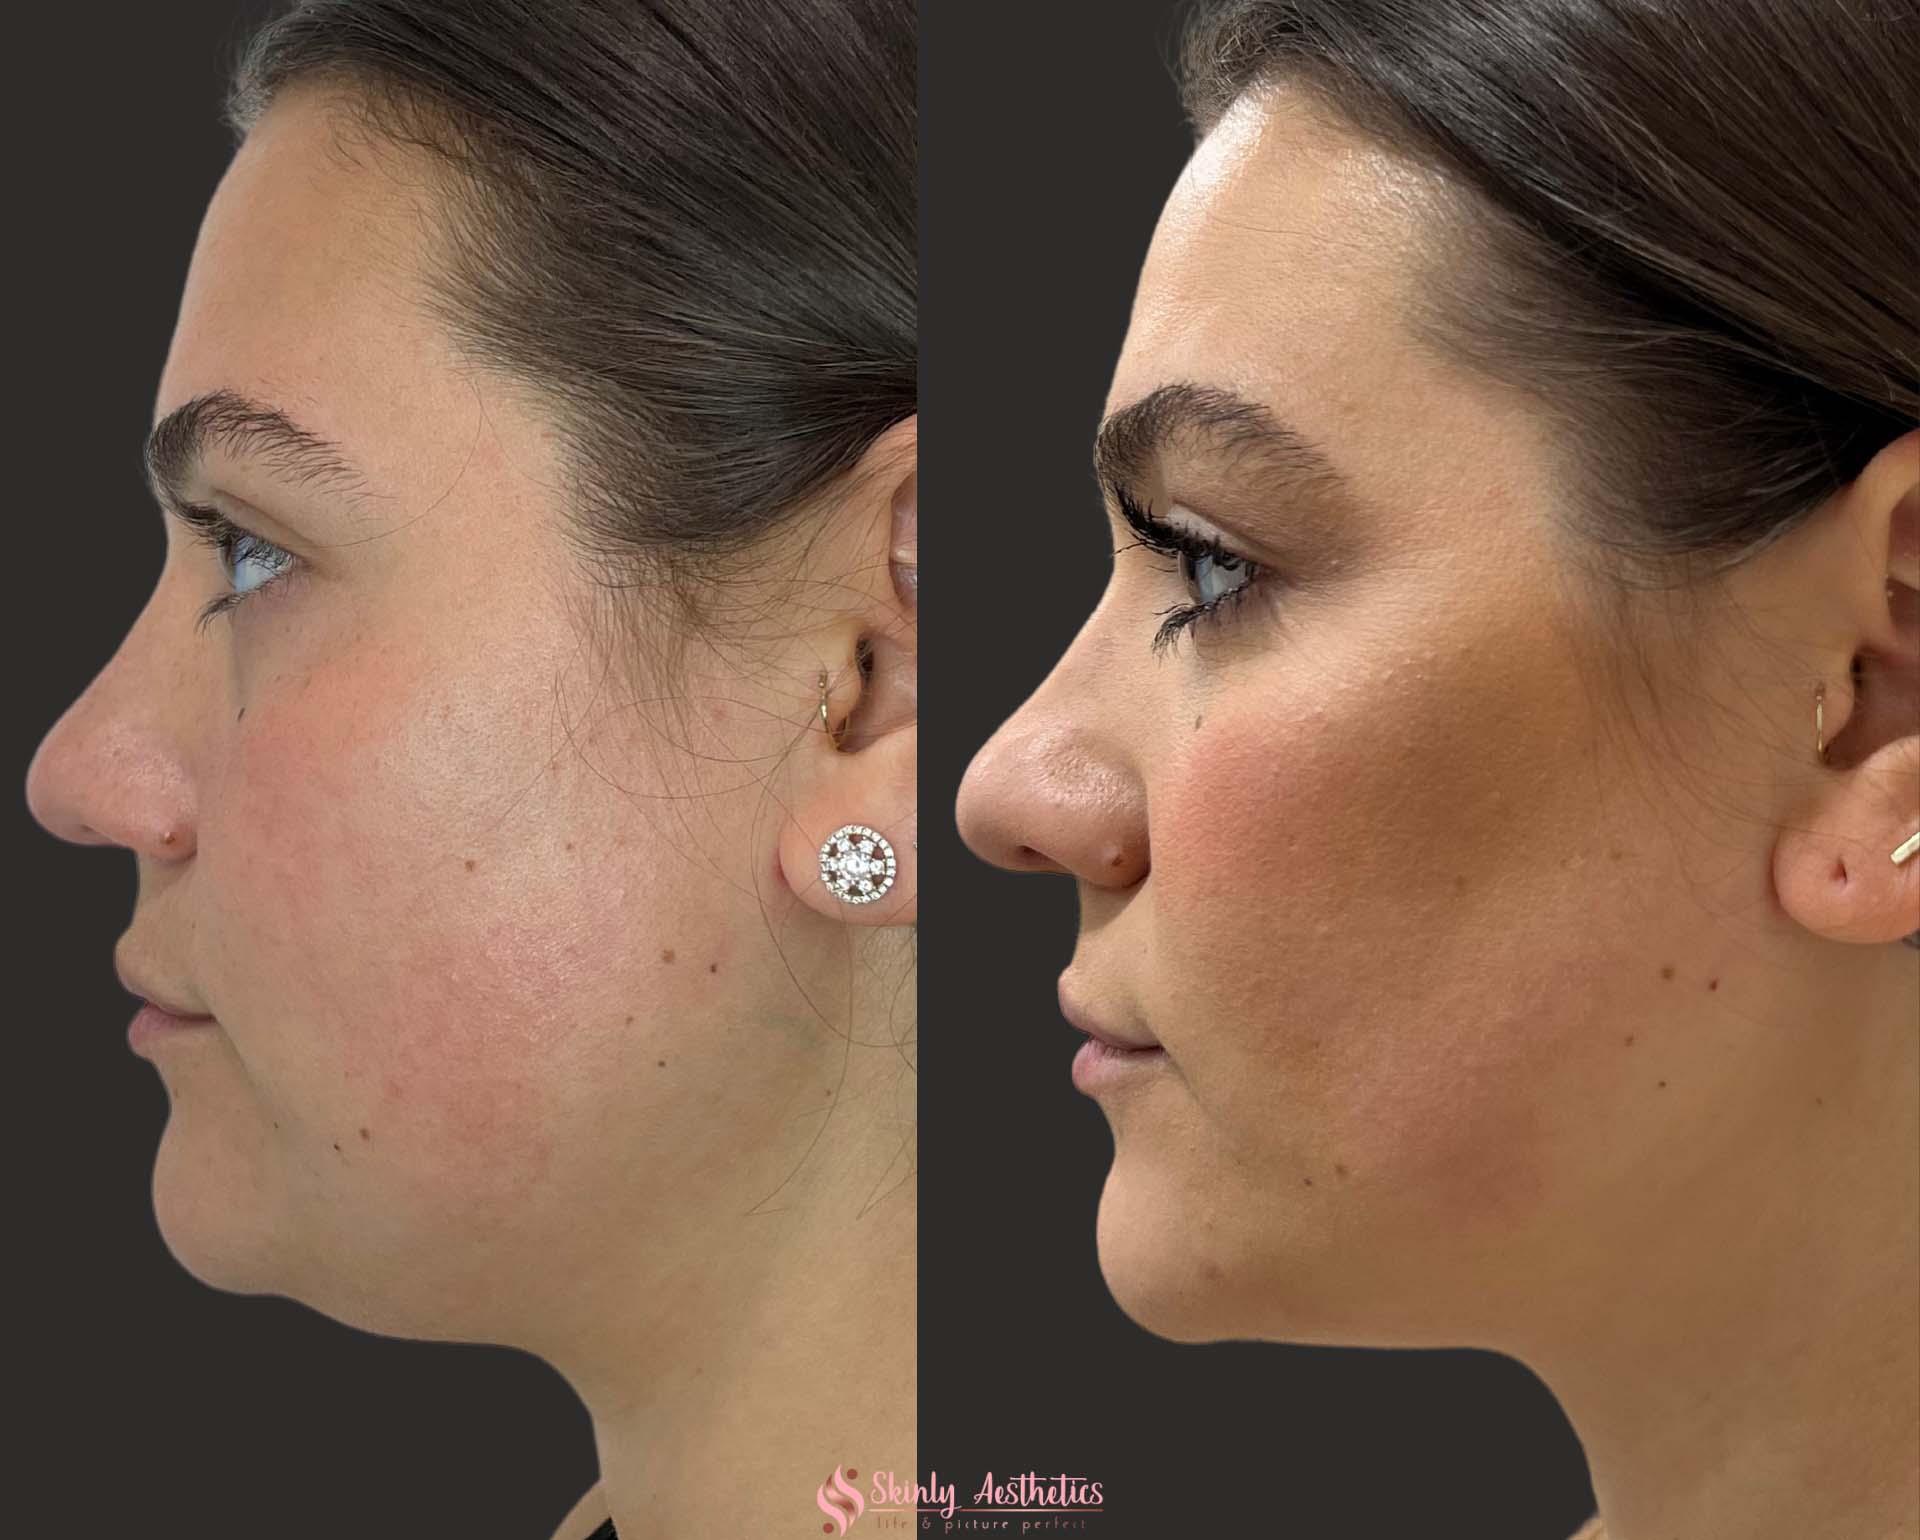 before and after results following Kybella and CoolSculpting Mini treatments for double chin fat